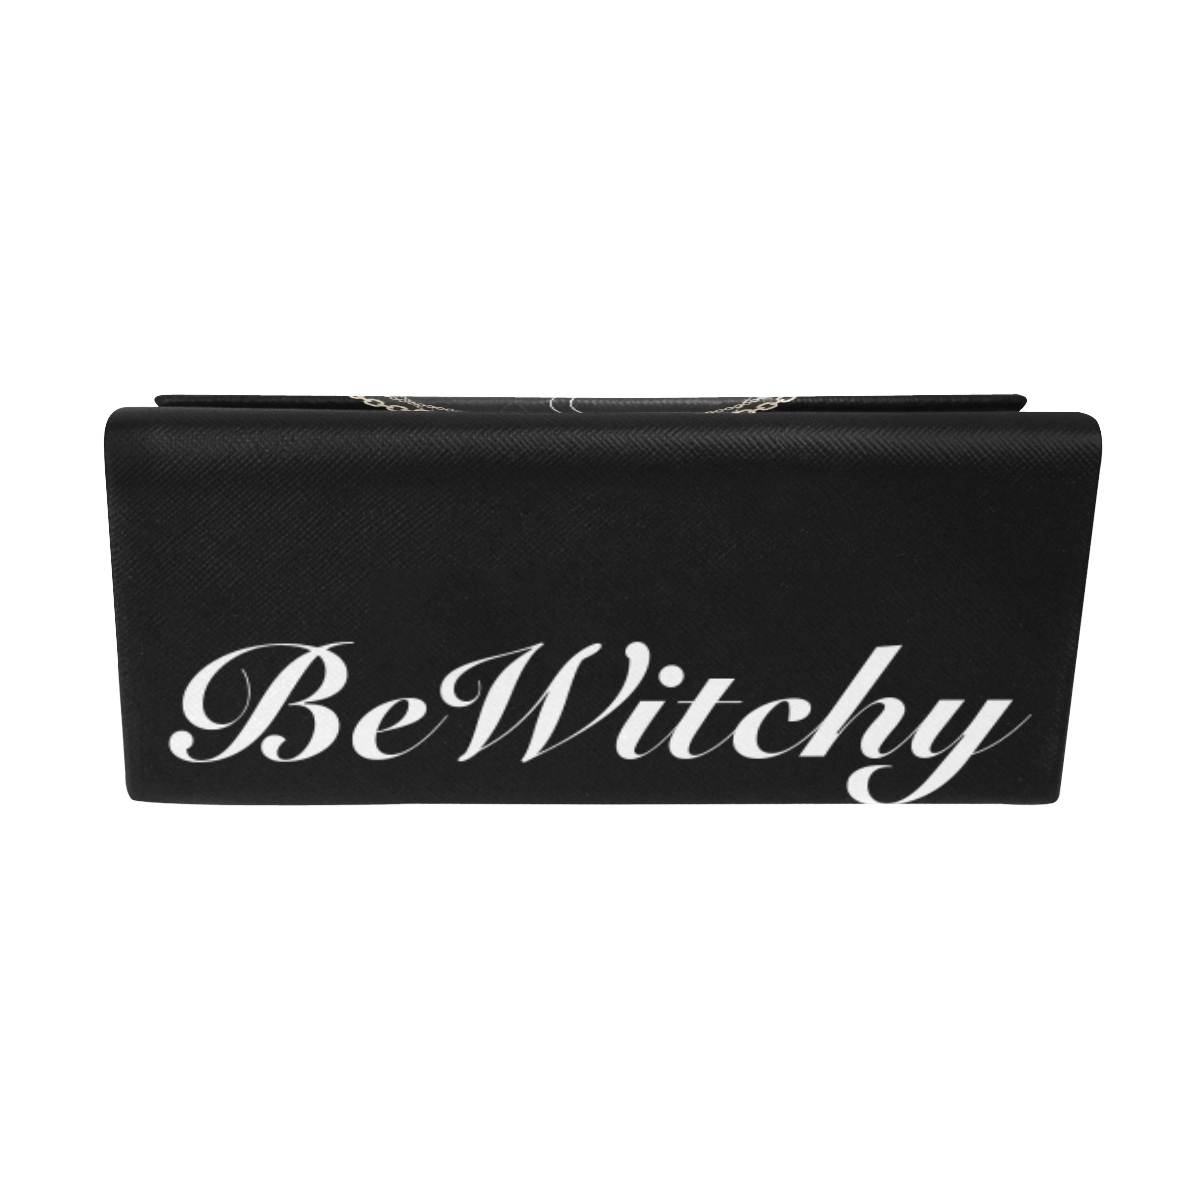 rich witch glasses case Custom Foldable Glasses Case